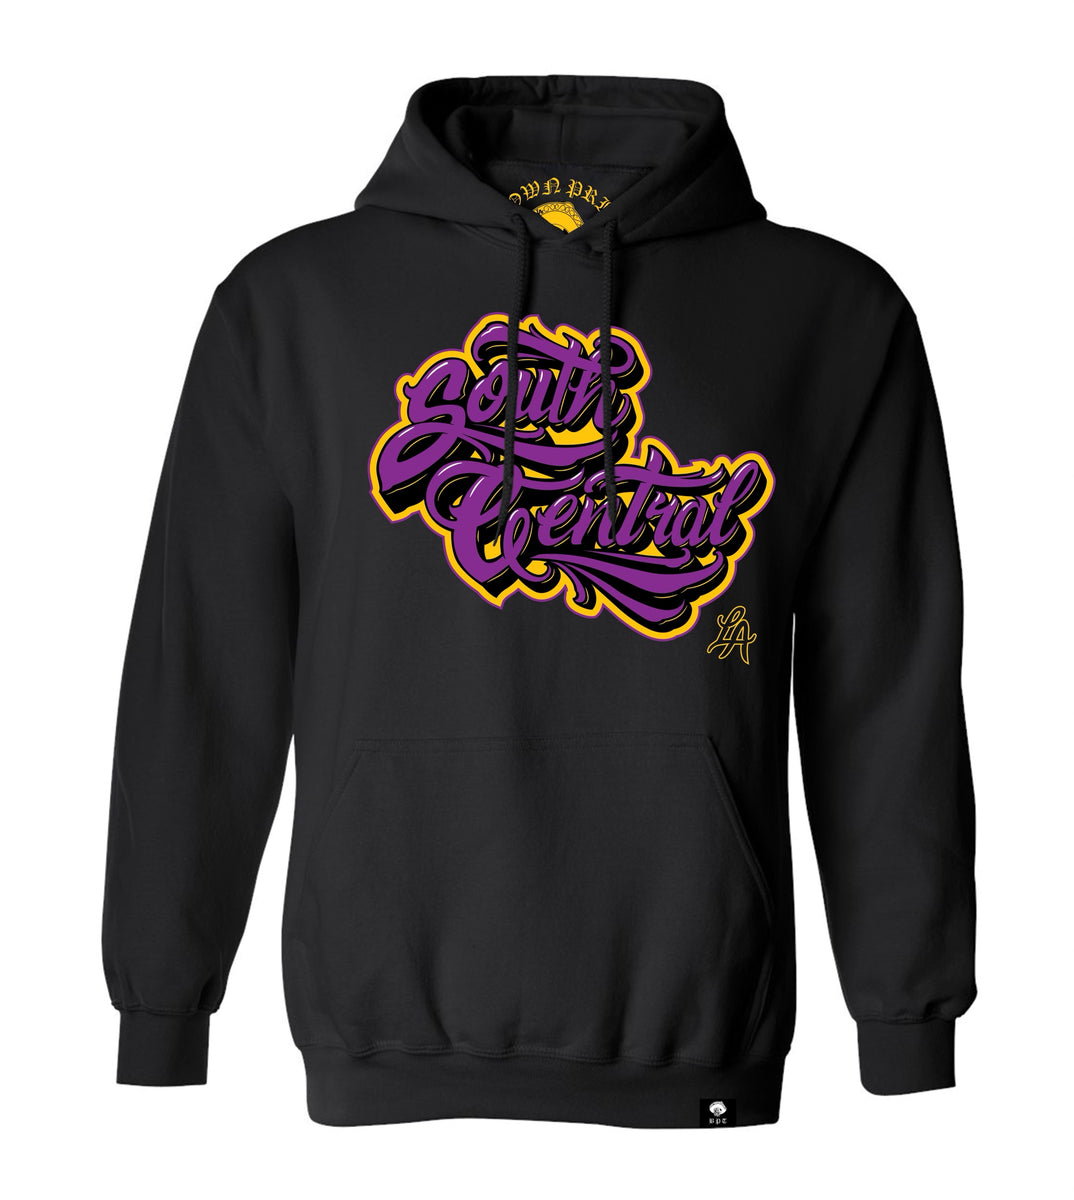 “South central” Lakers color way – Brown Pride Tattoo Shop